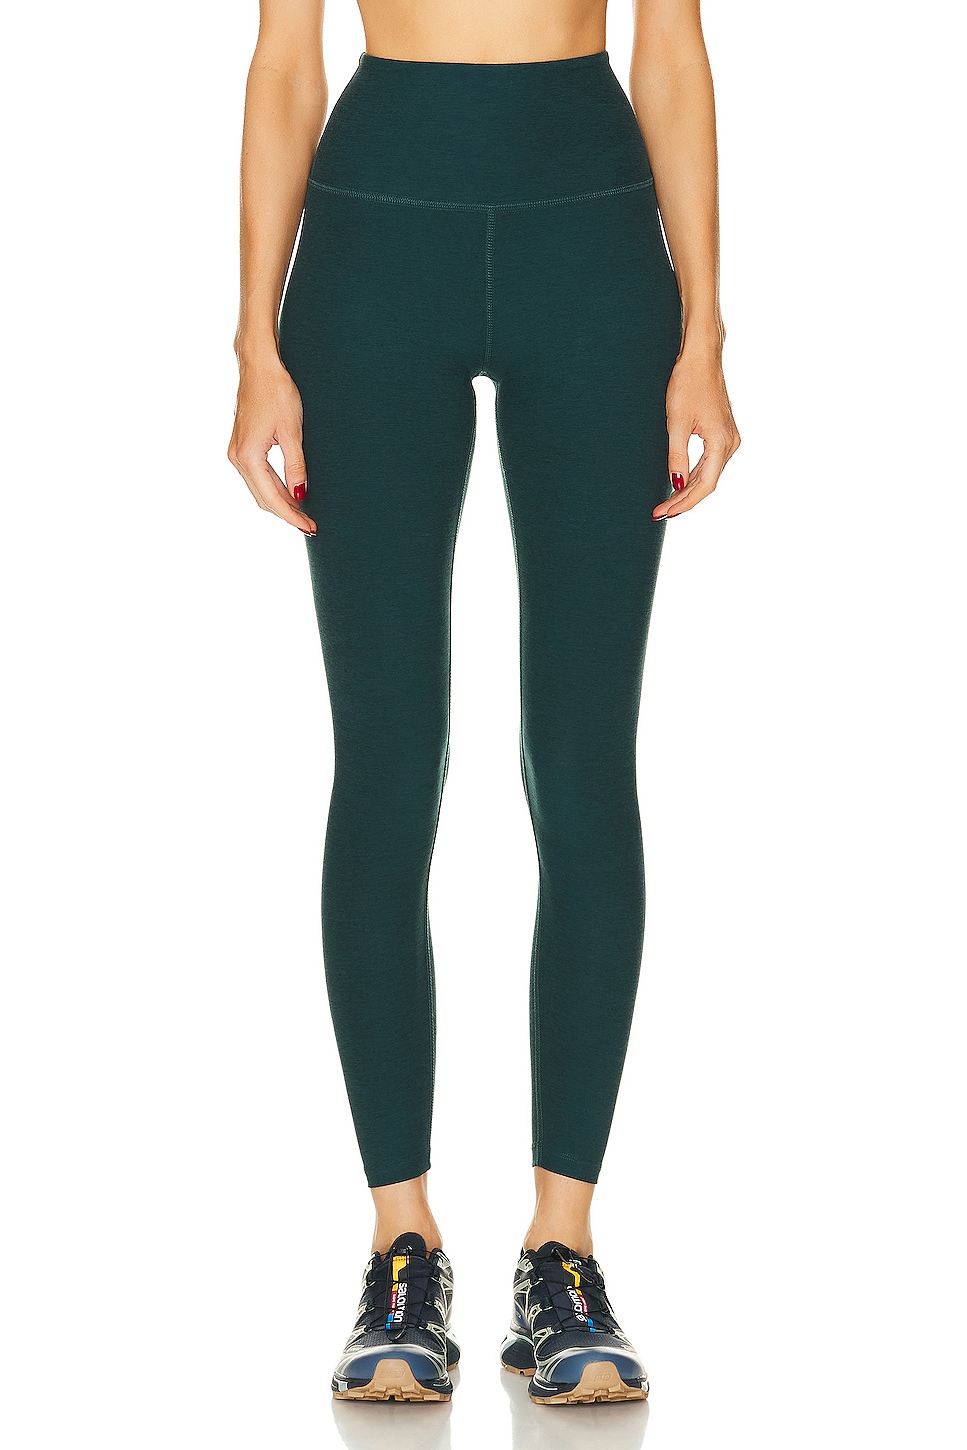 Image 1 of Beyond Yoga Spacedye Caught In The Midi High Waisted Legging in Midnight Green Heather